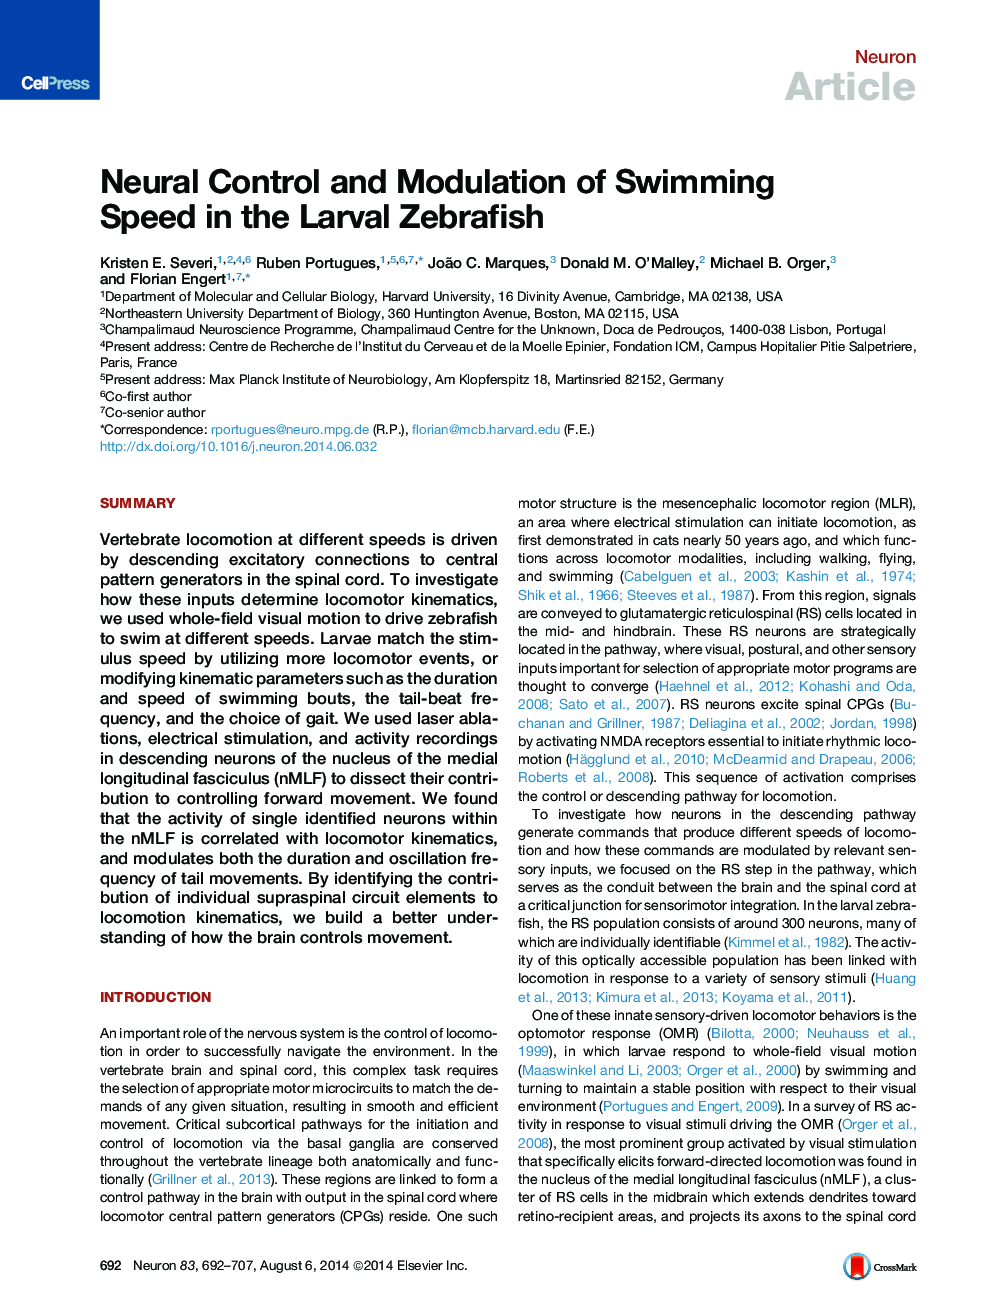 Neural Control and Modulation of Swimming Speed in the Larval Zebrafish